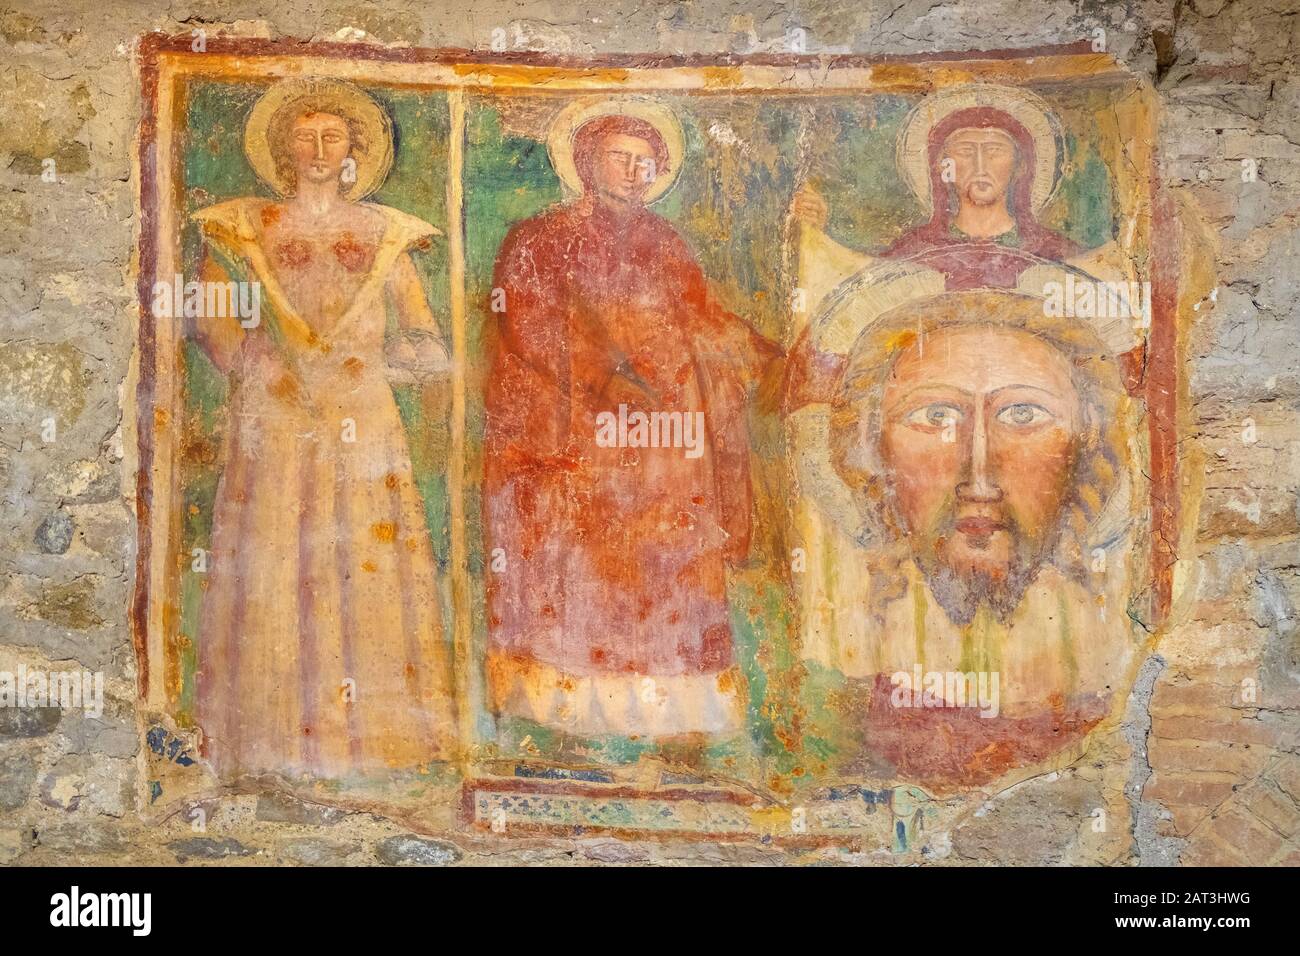 Perugia, Umbria / Italy - 2018/05/28: Interior of the V century Early Christianity St. Michel Archangel Church - Chiesa di San Michele Arcangelo in Perugia historic quarter - wall frescoes Stock Photo